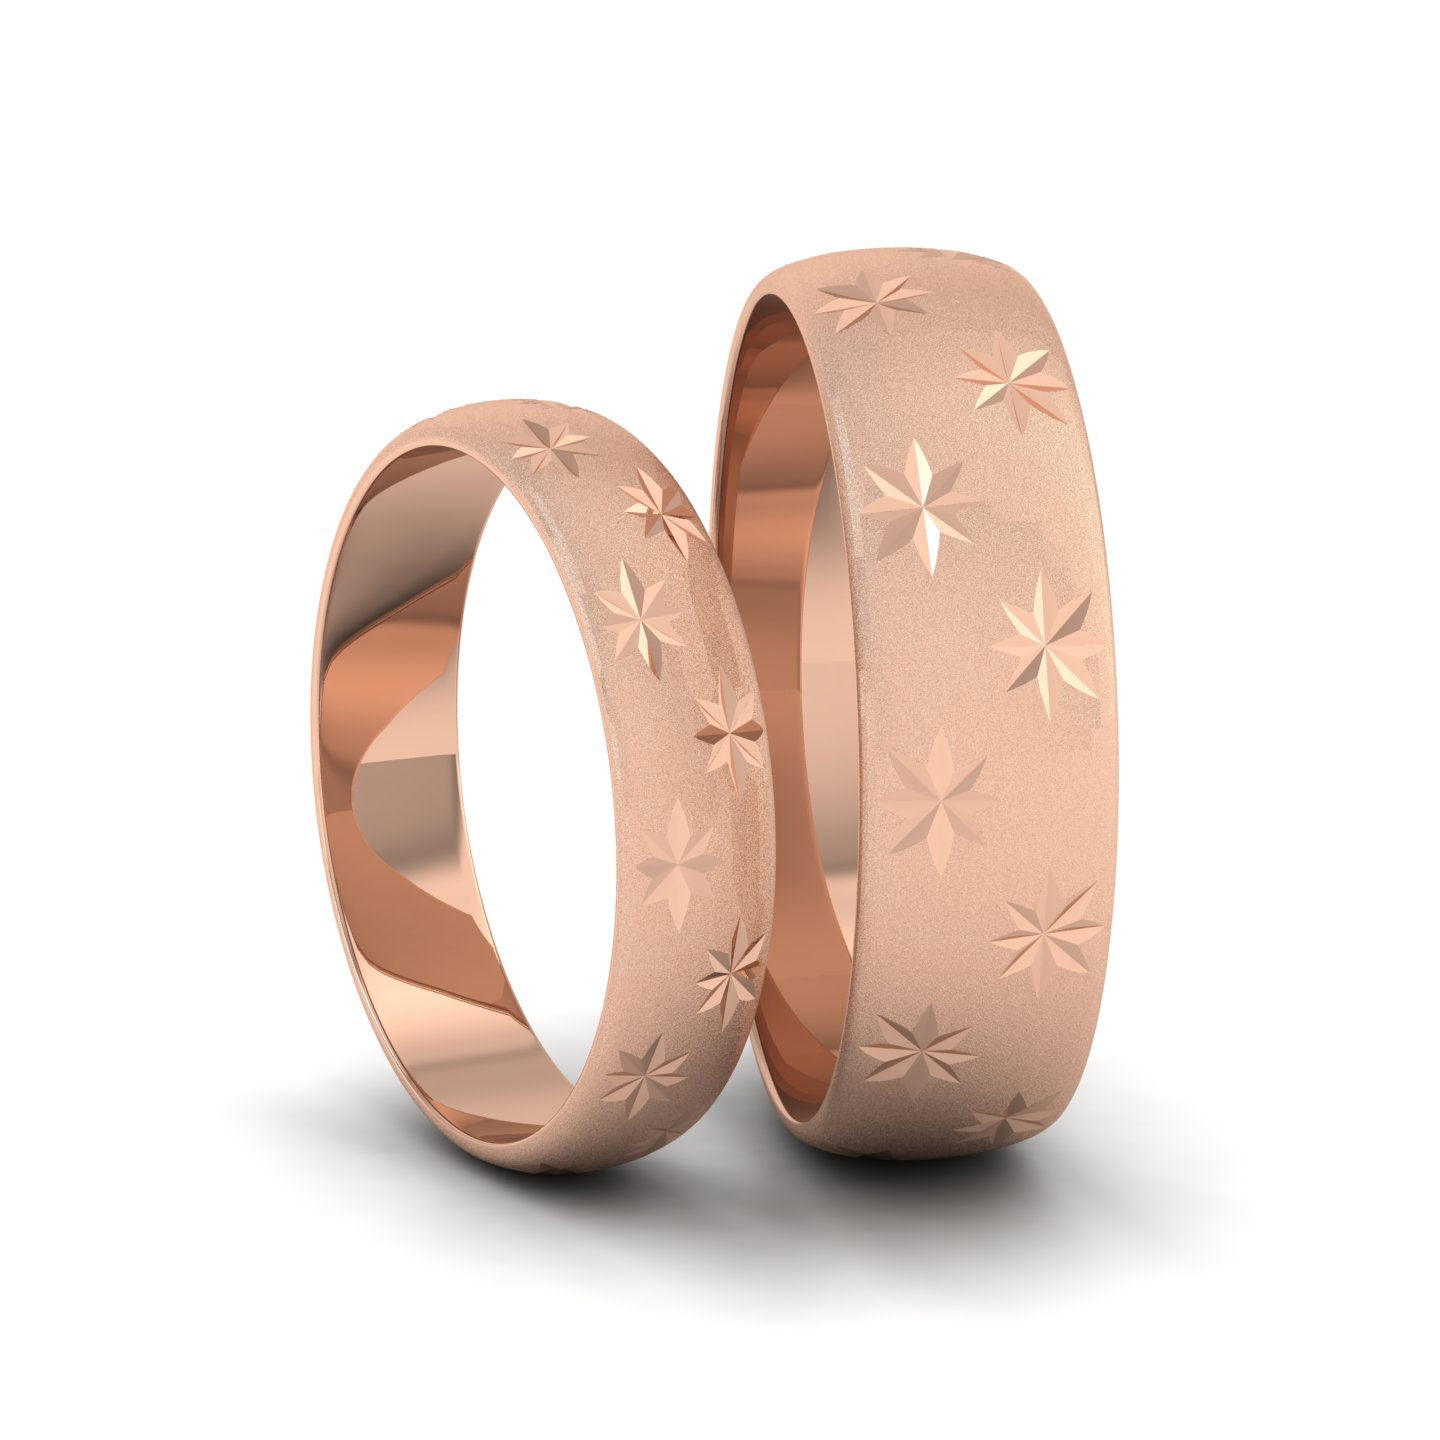 Star Patterned 18ct Rose Gold 4mm Wedding Ring